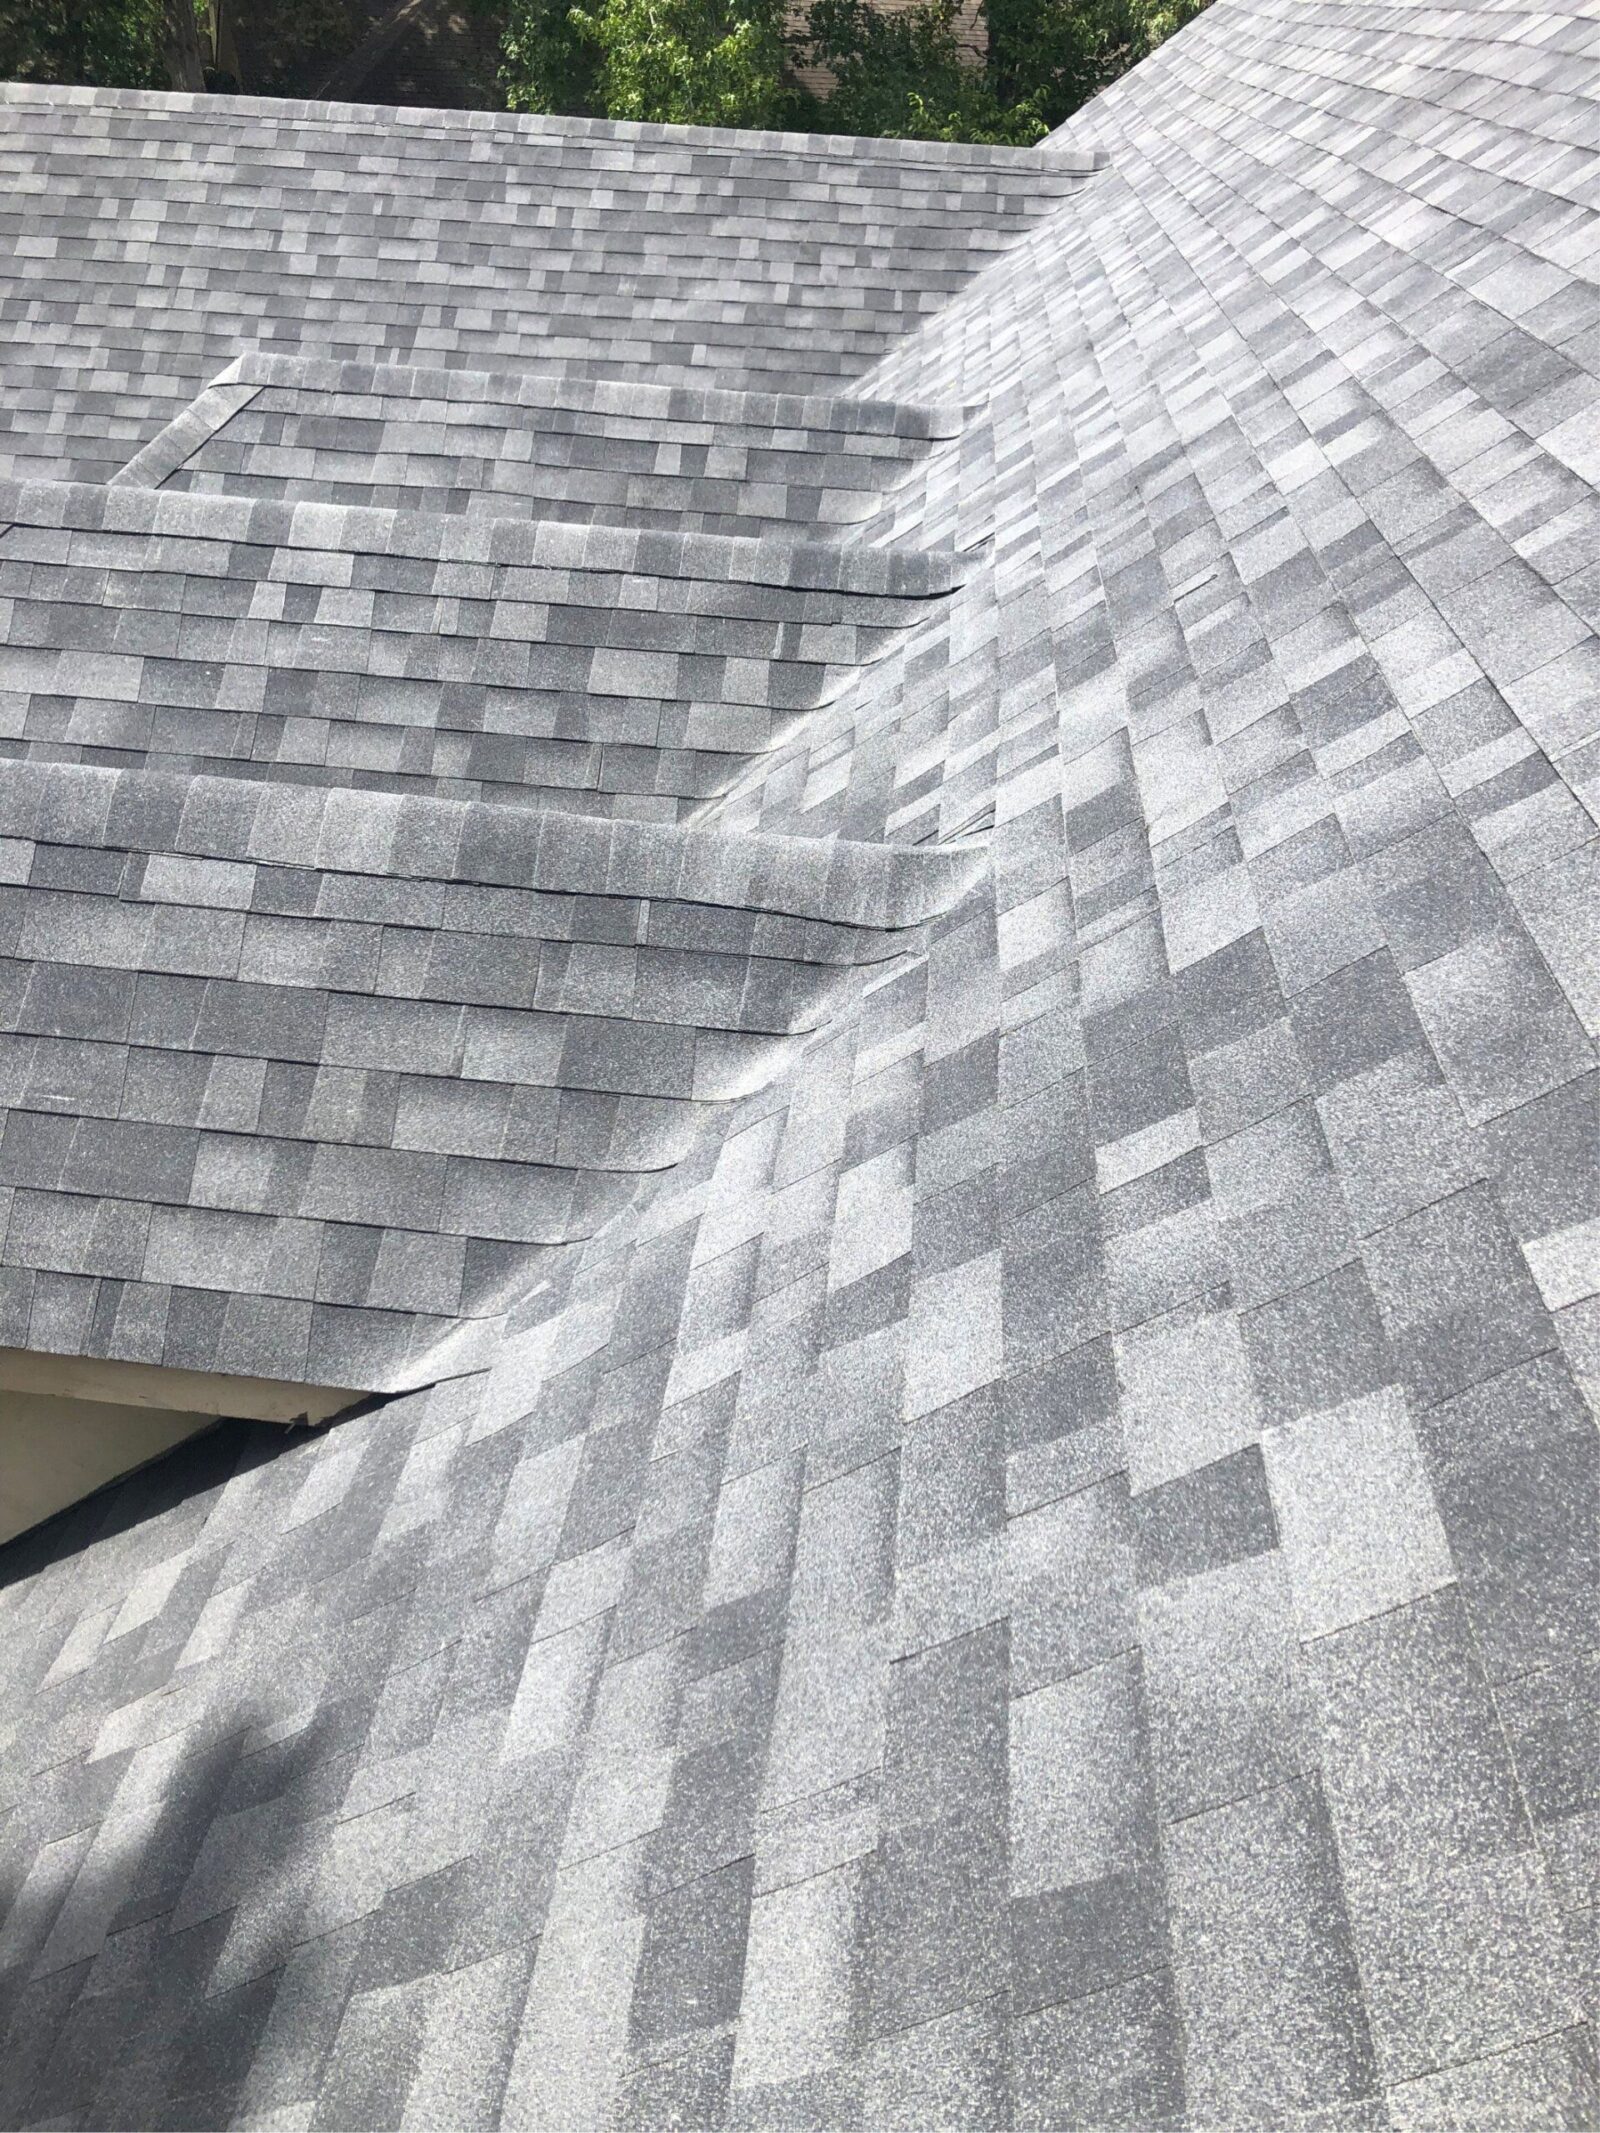 A close-up of a complete reroof done in Little Rock with asphalt shingles